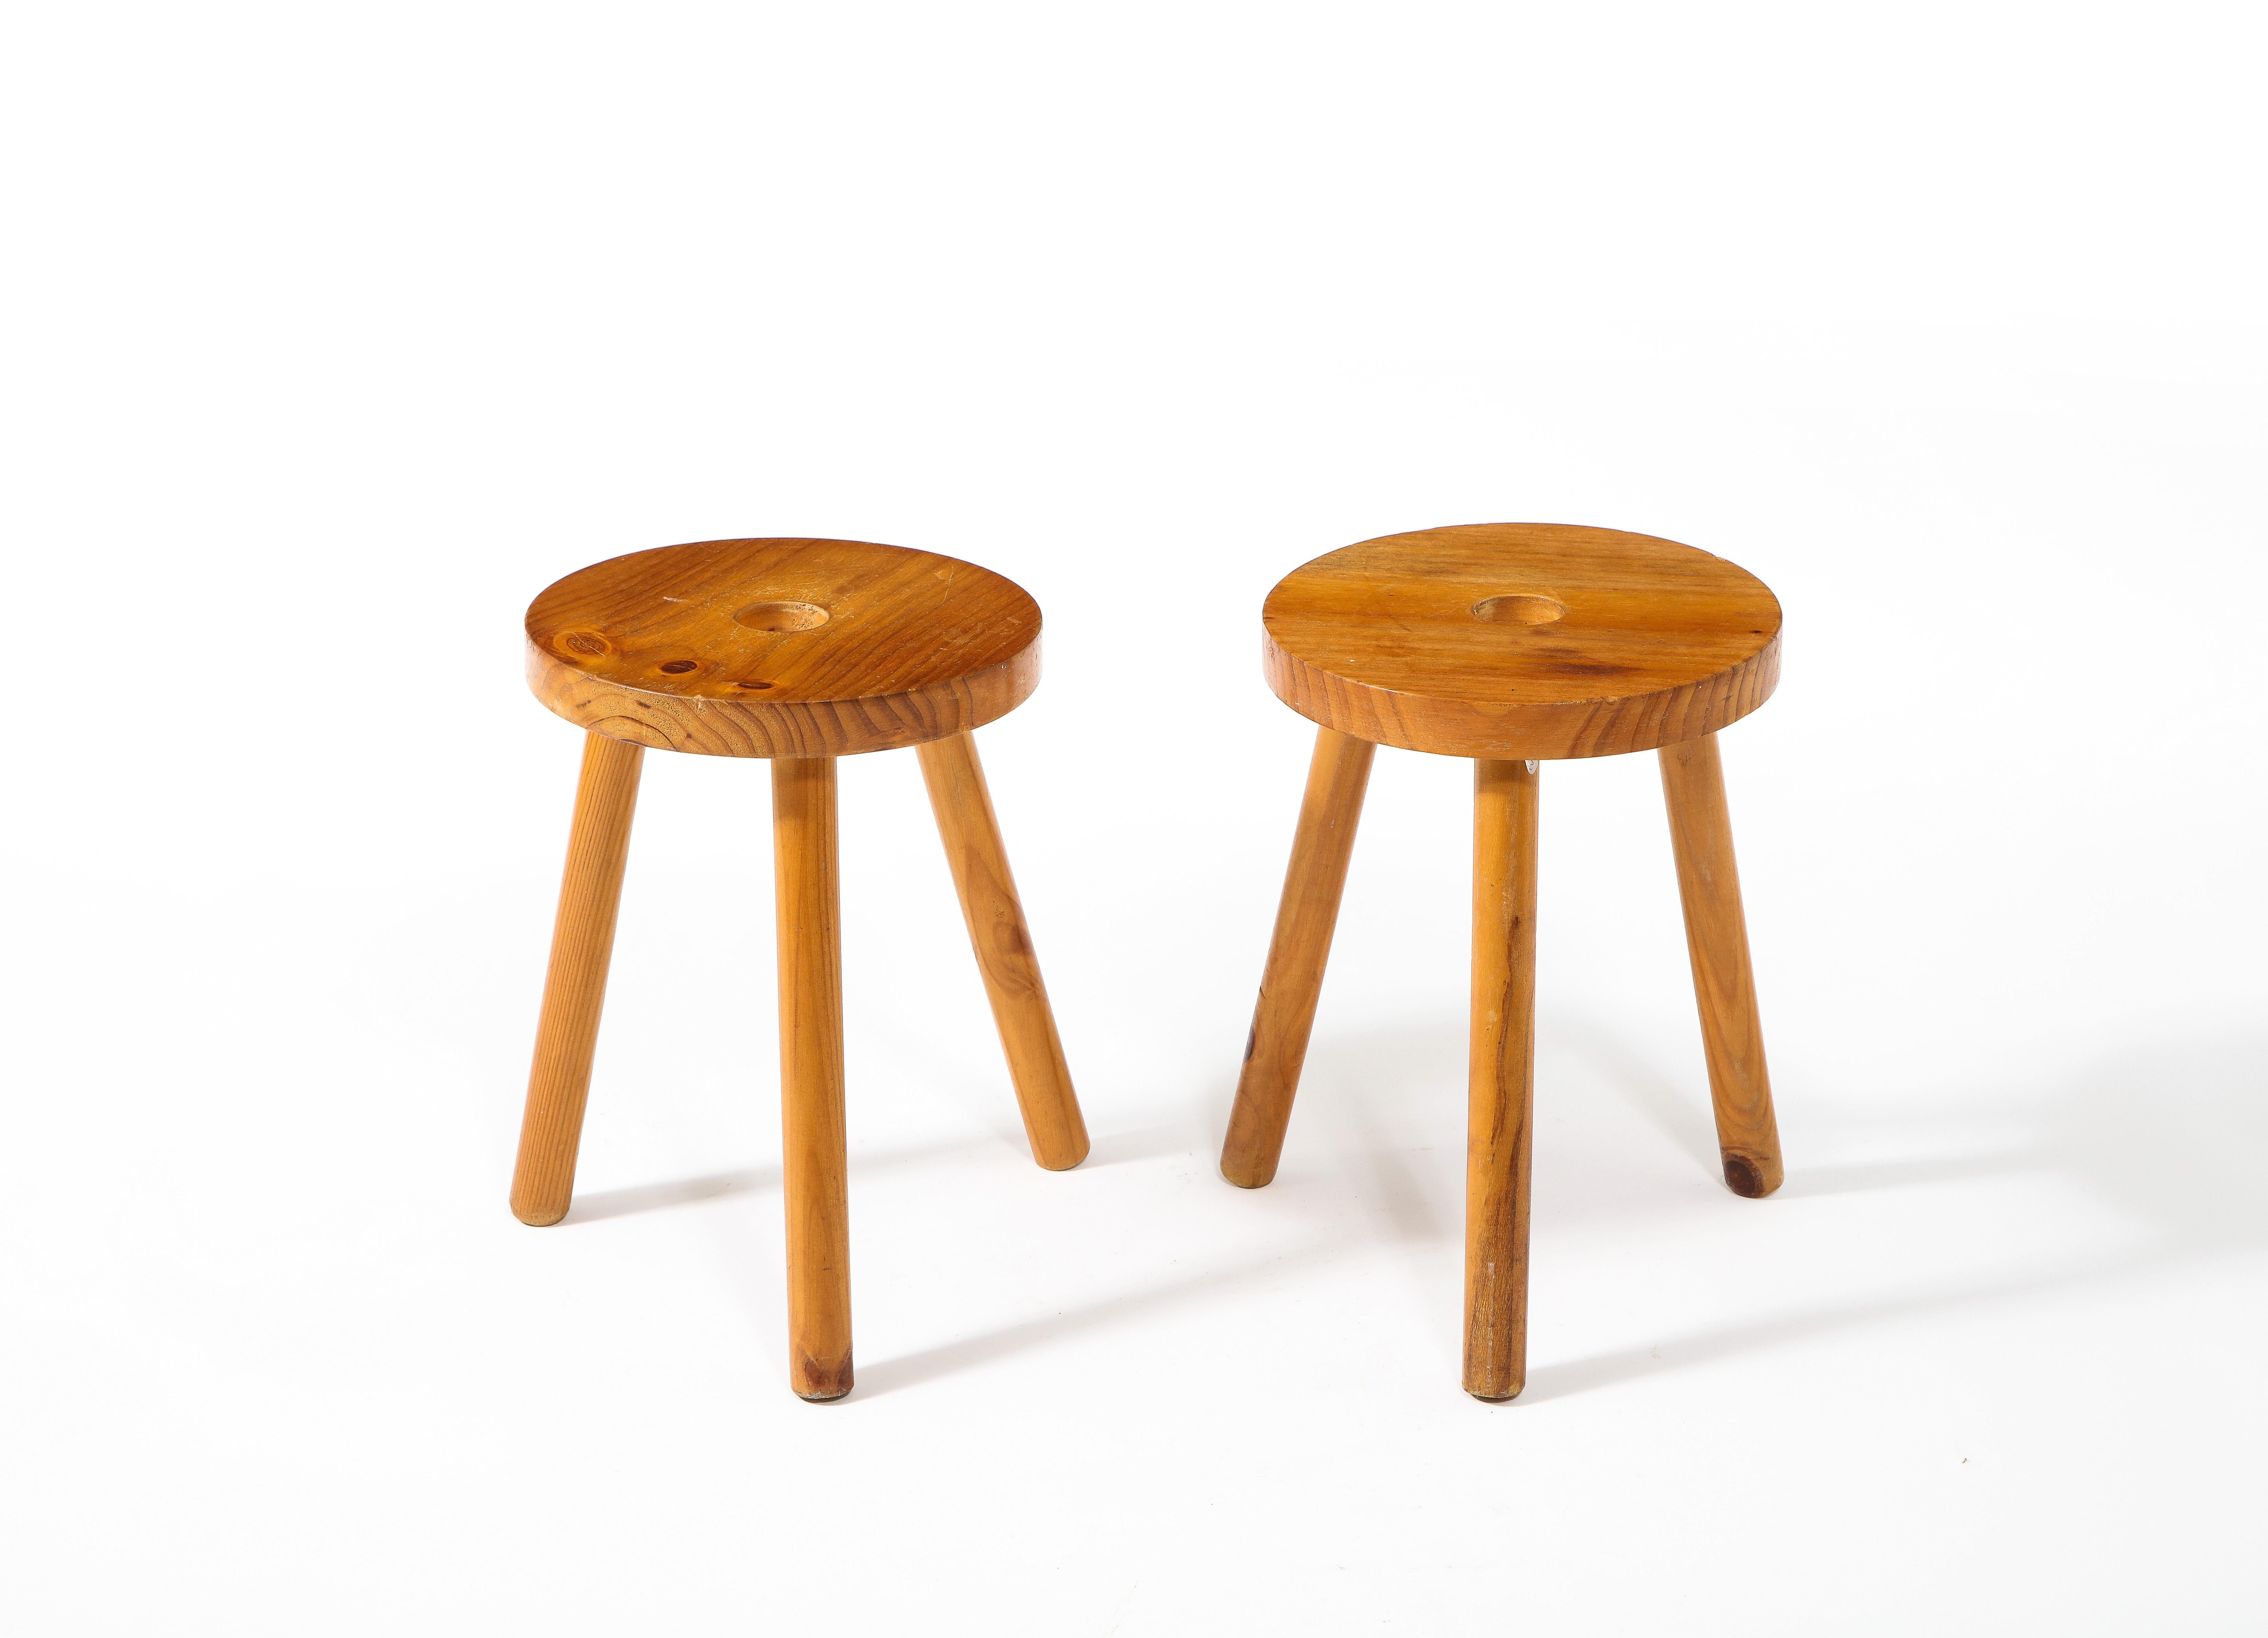 A pair of pine tripod stools with a center hole in the seat. They unscrew entirely for shipping.